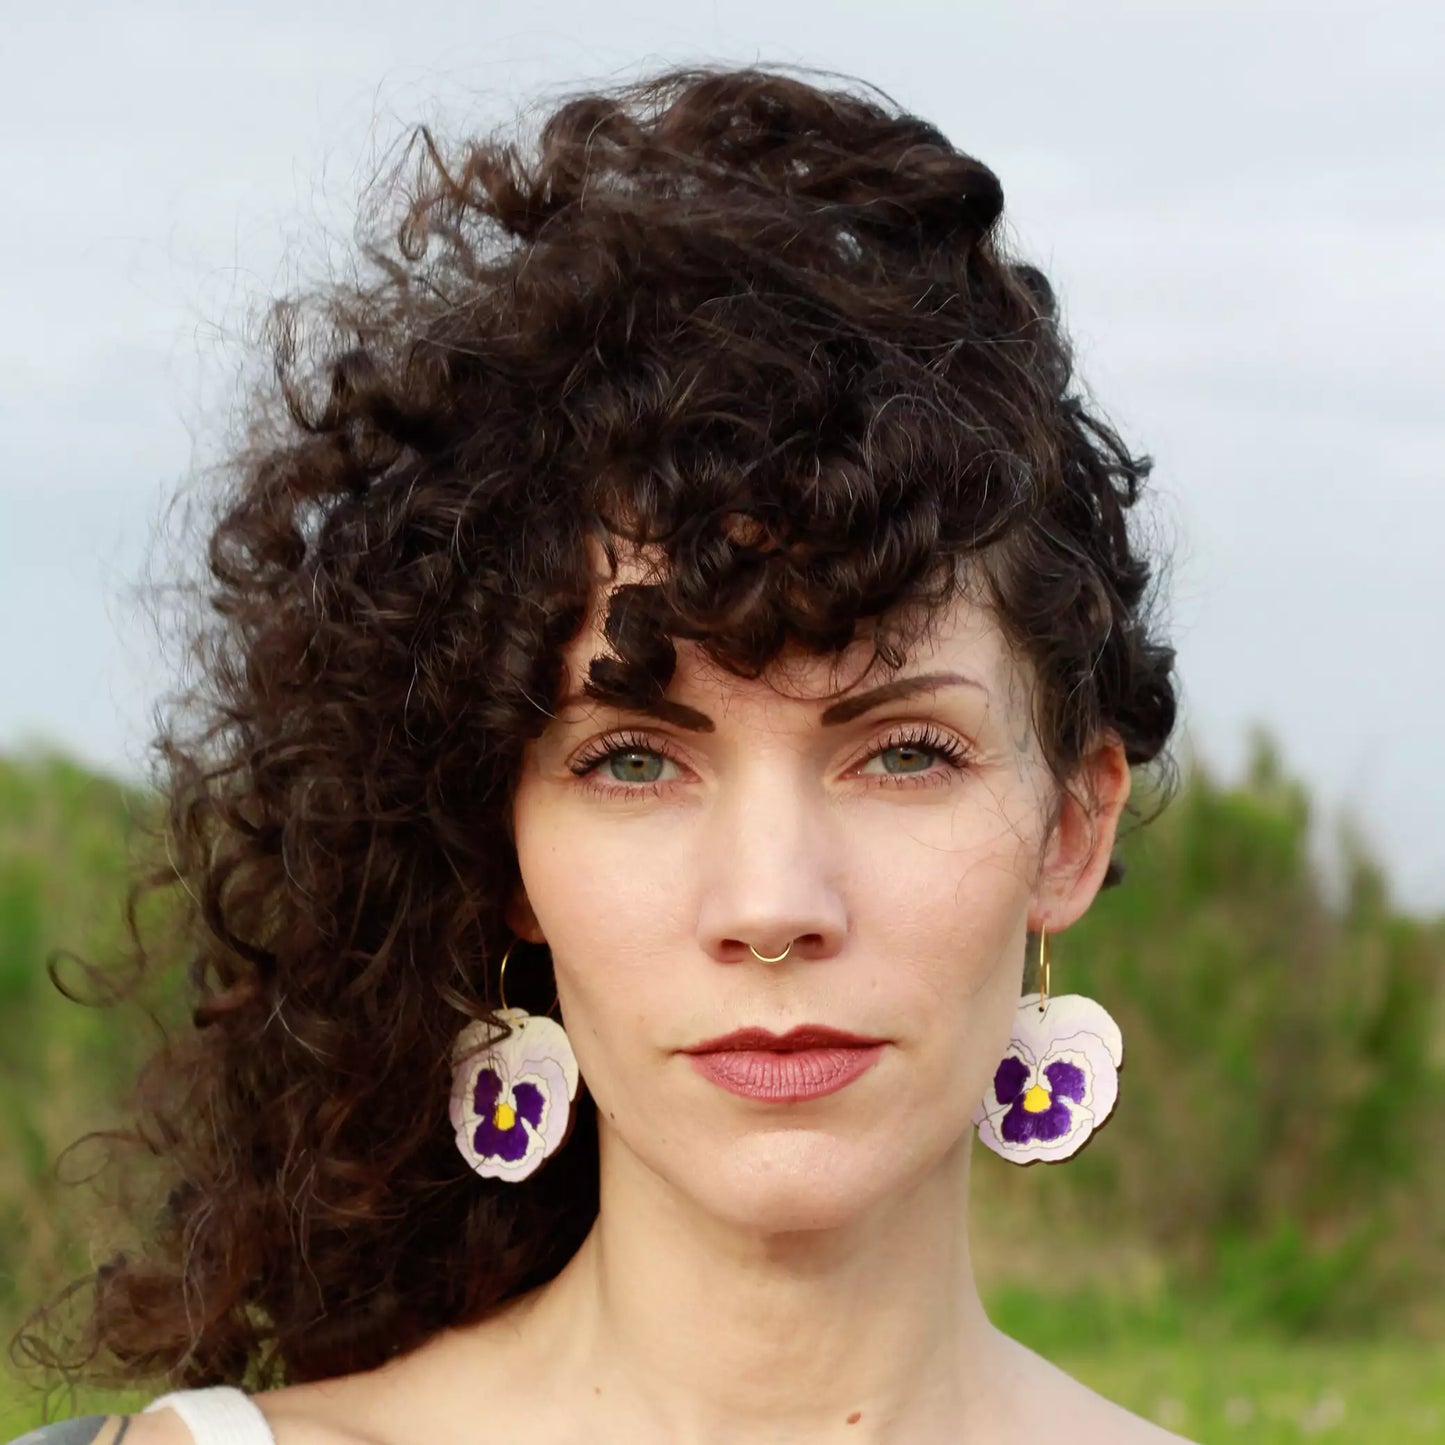 Pansy Hoops